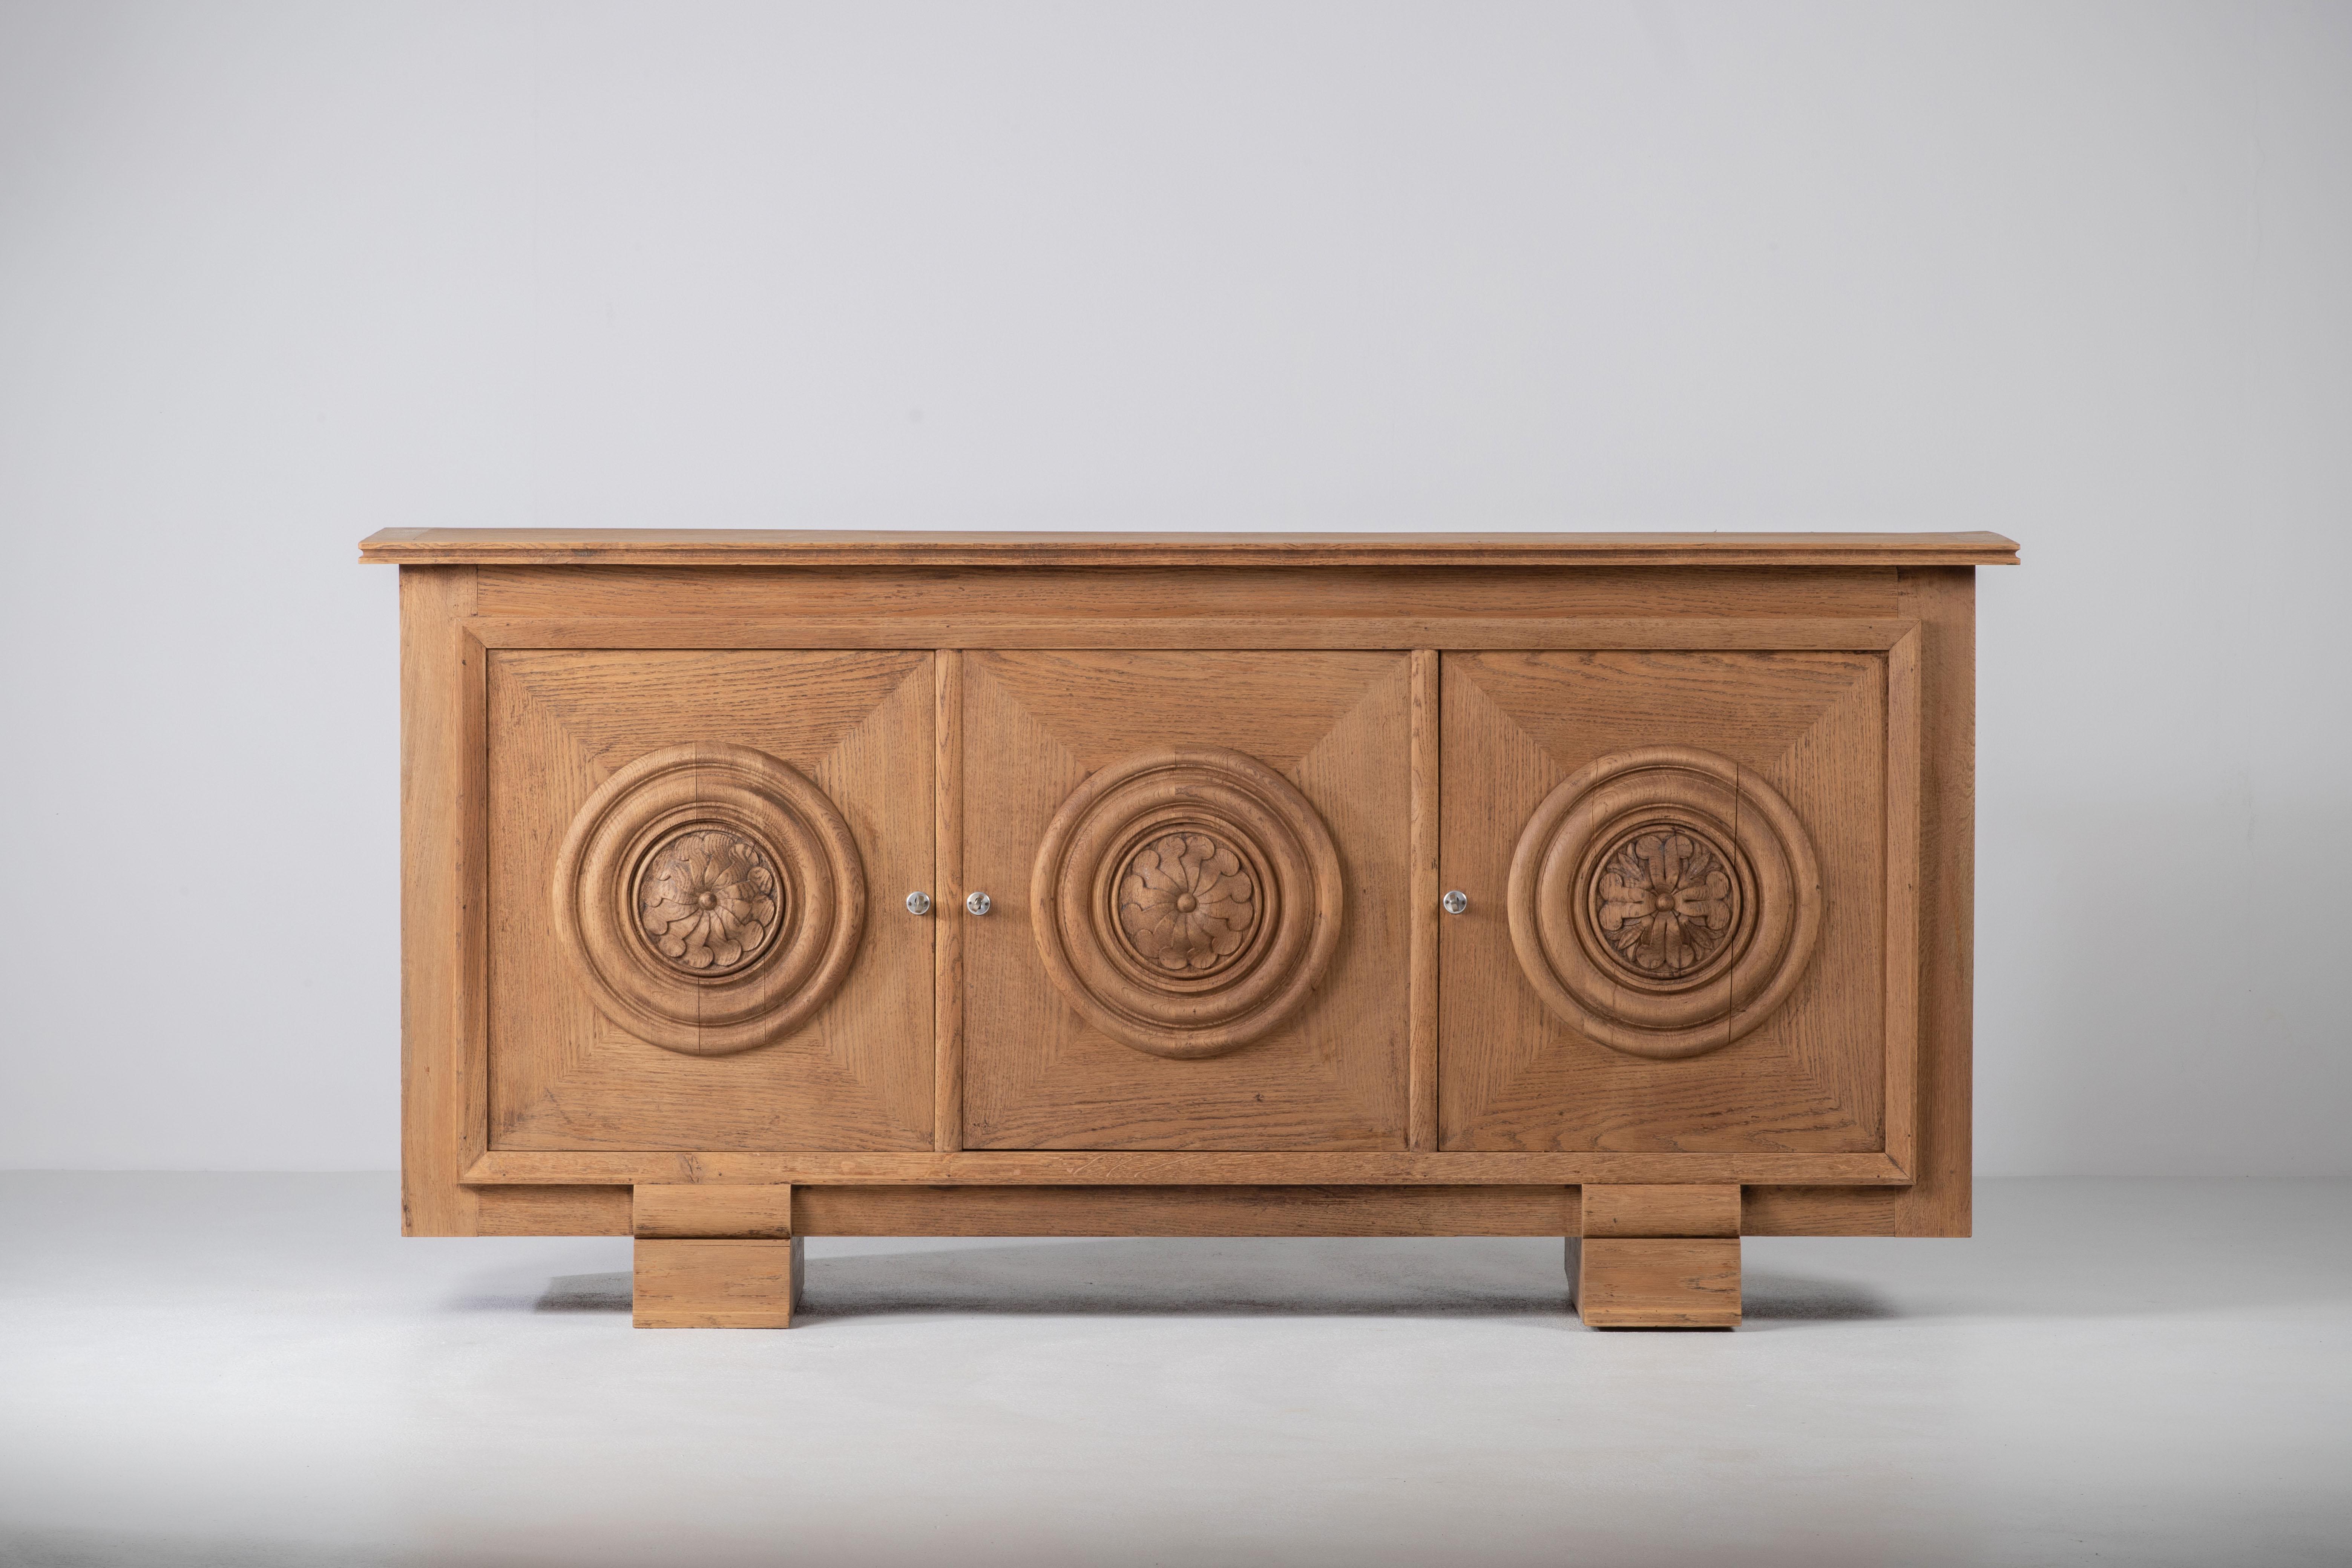 Very elegant Credenza in solid oak, France, 1940s.
Large Art Deco Brutalist sideboard. 
The credenza consists of three storage facilities and covered with very detailed designed doors. 
Very elegant 
The refined wooden structures on the doors create